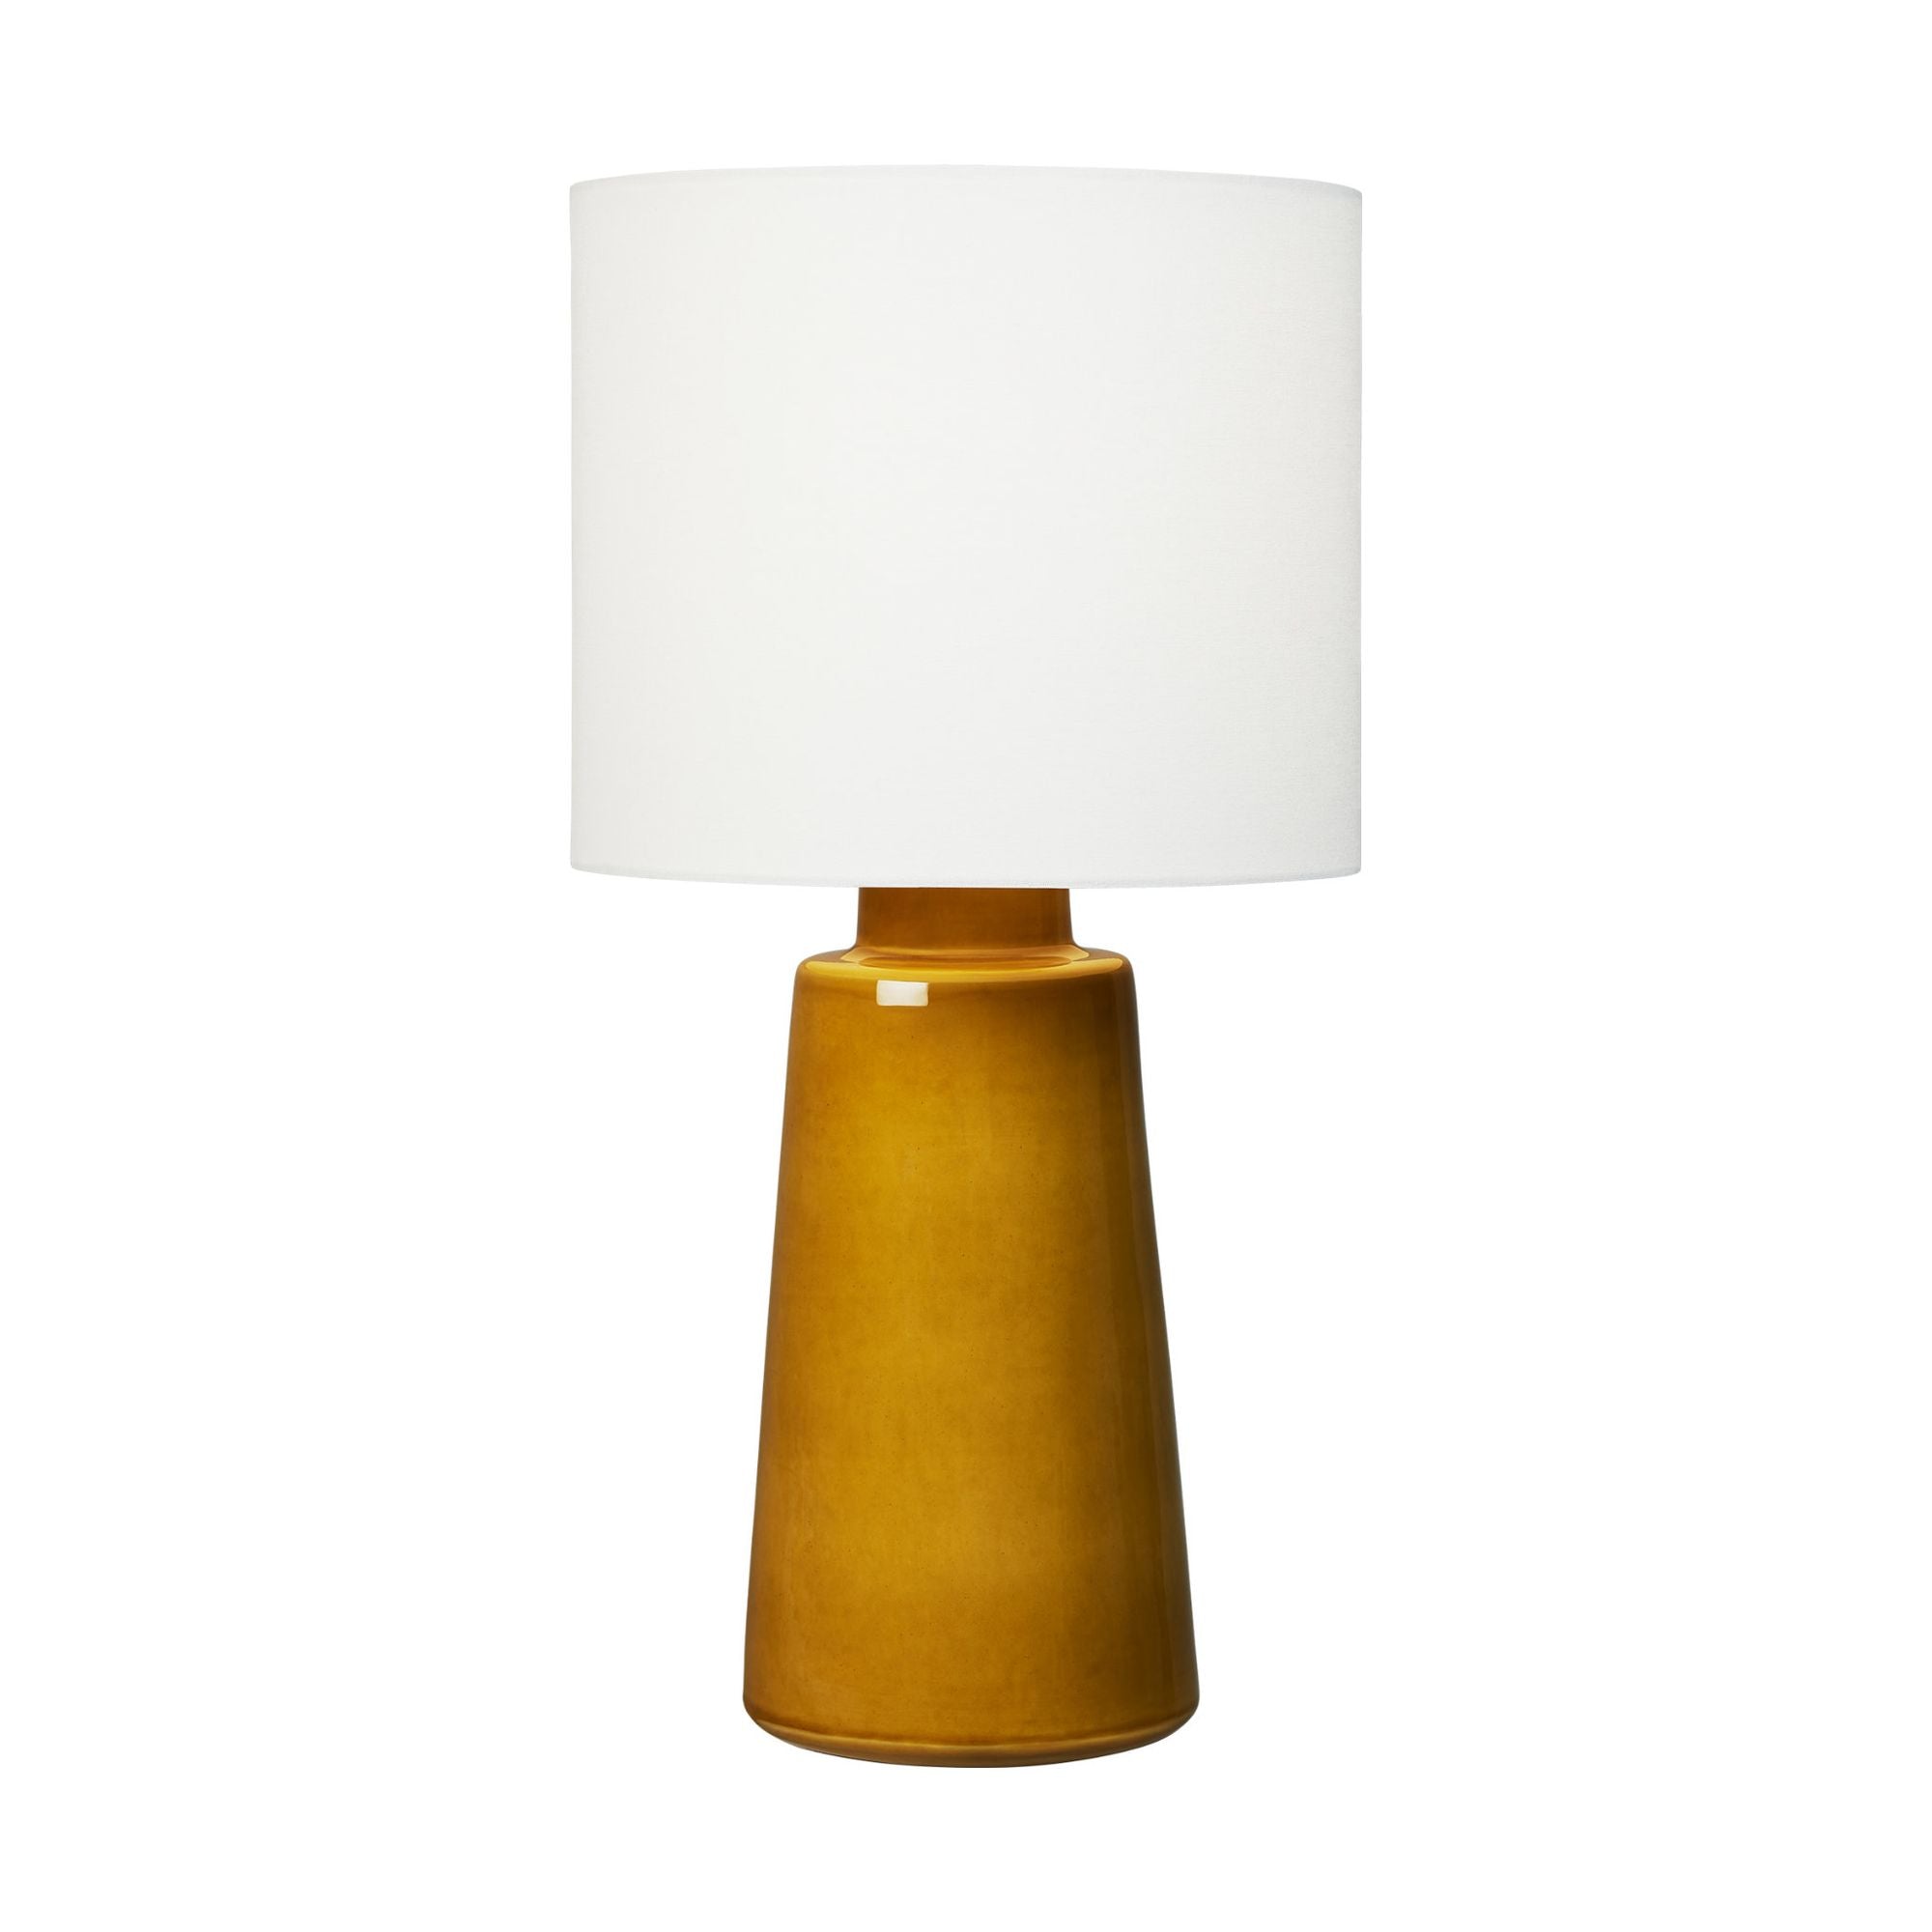 Barbara Barry Vessel Large Table Lamp in Oil Can